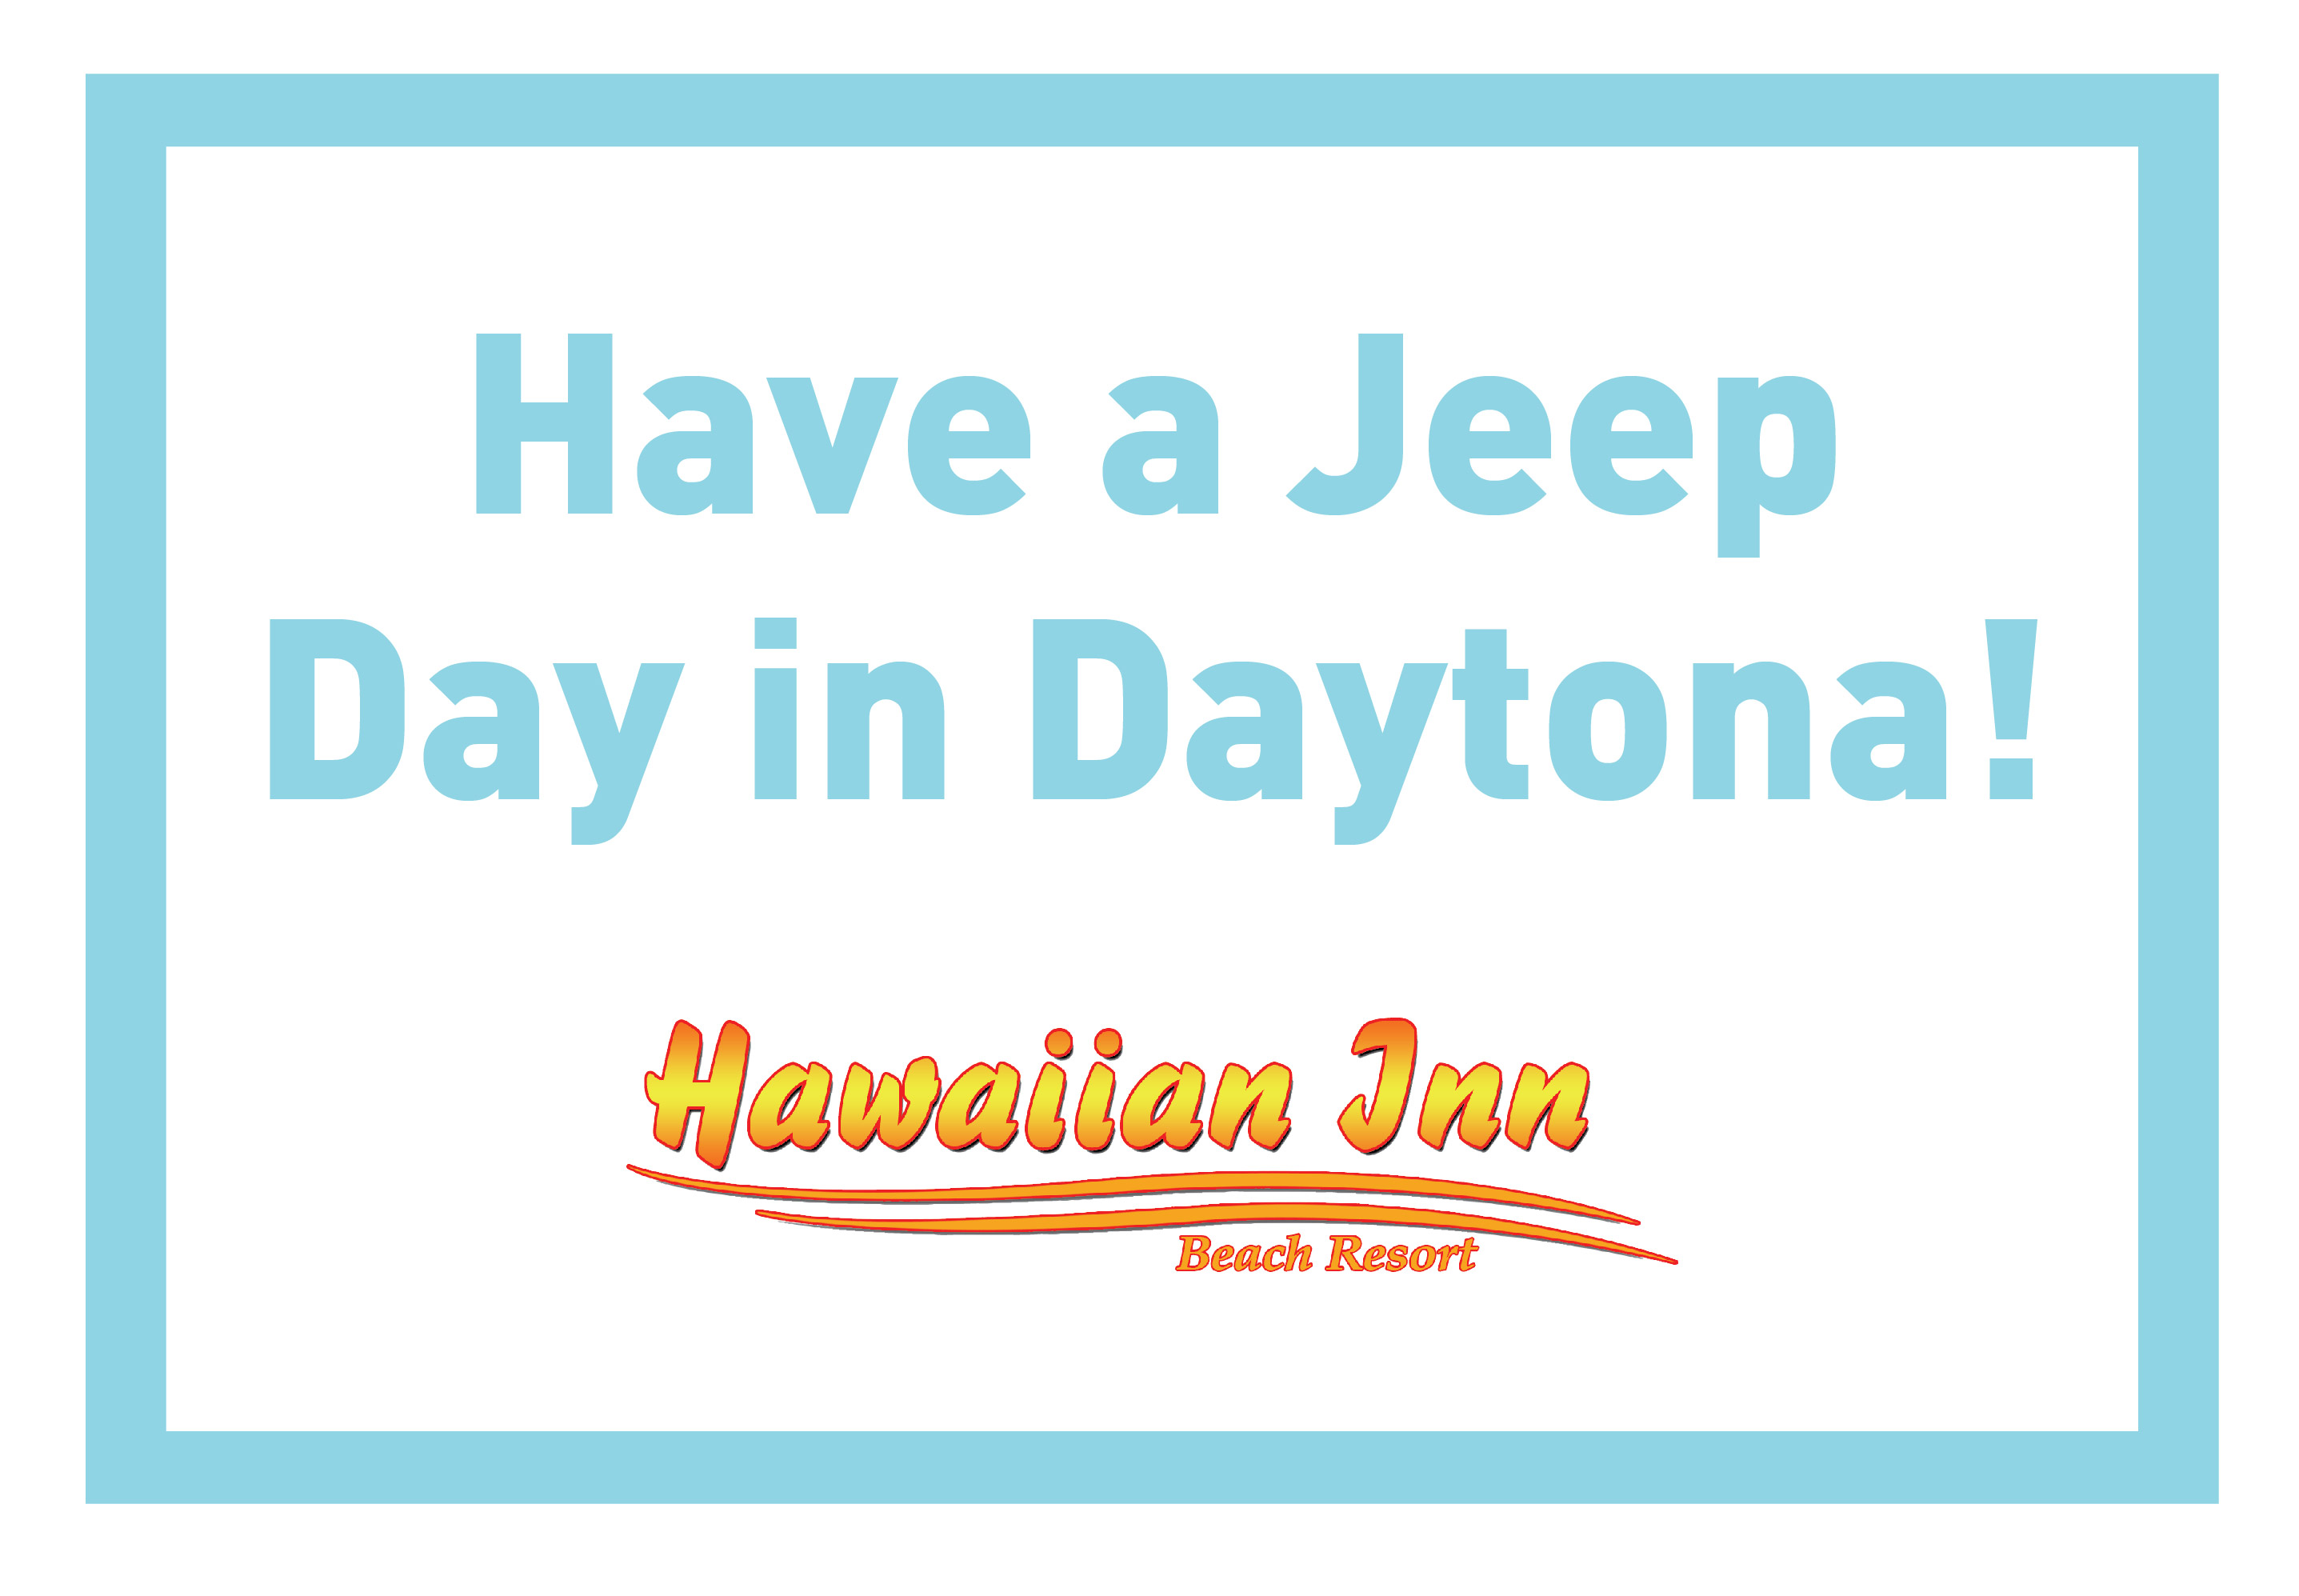 Have a Jeep Day in Daytona!